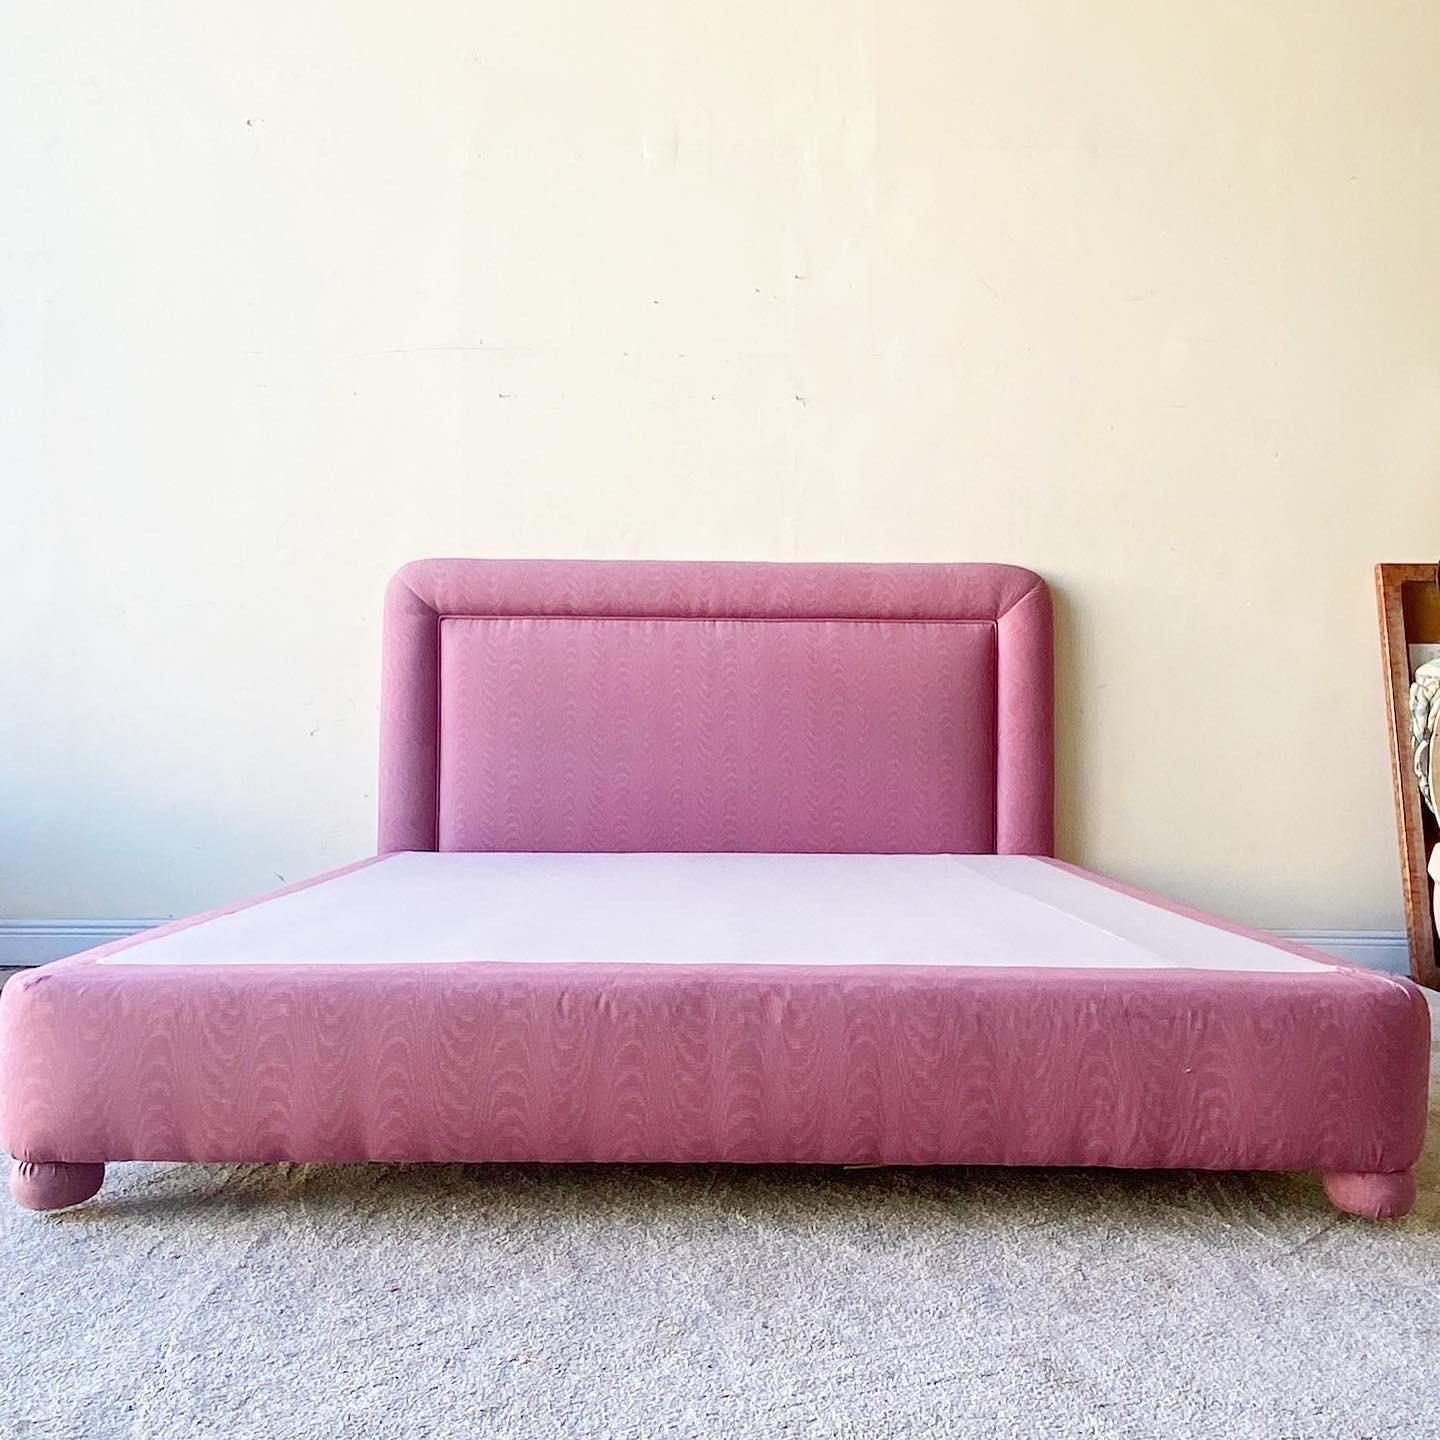 Extravagant vintage 1980s postmodern mauve pink king size platform bed. Included is a matching headboard.

Bed frame measures 78”W, 81”D, 13.5”H
Headboard measures 78”W, 3.5”D, 47”H.